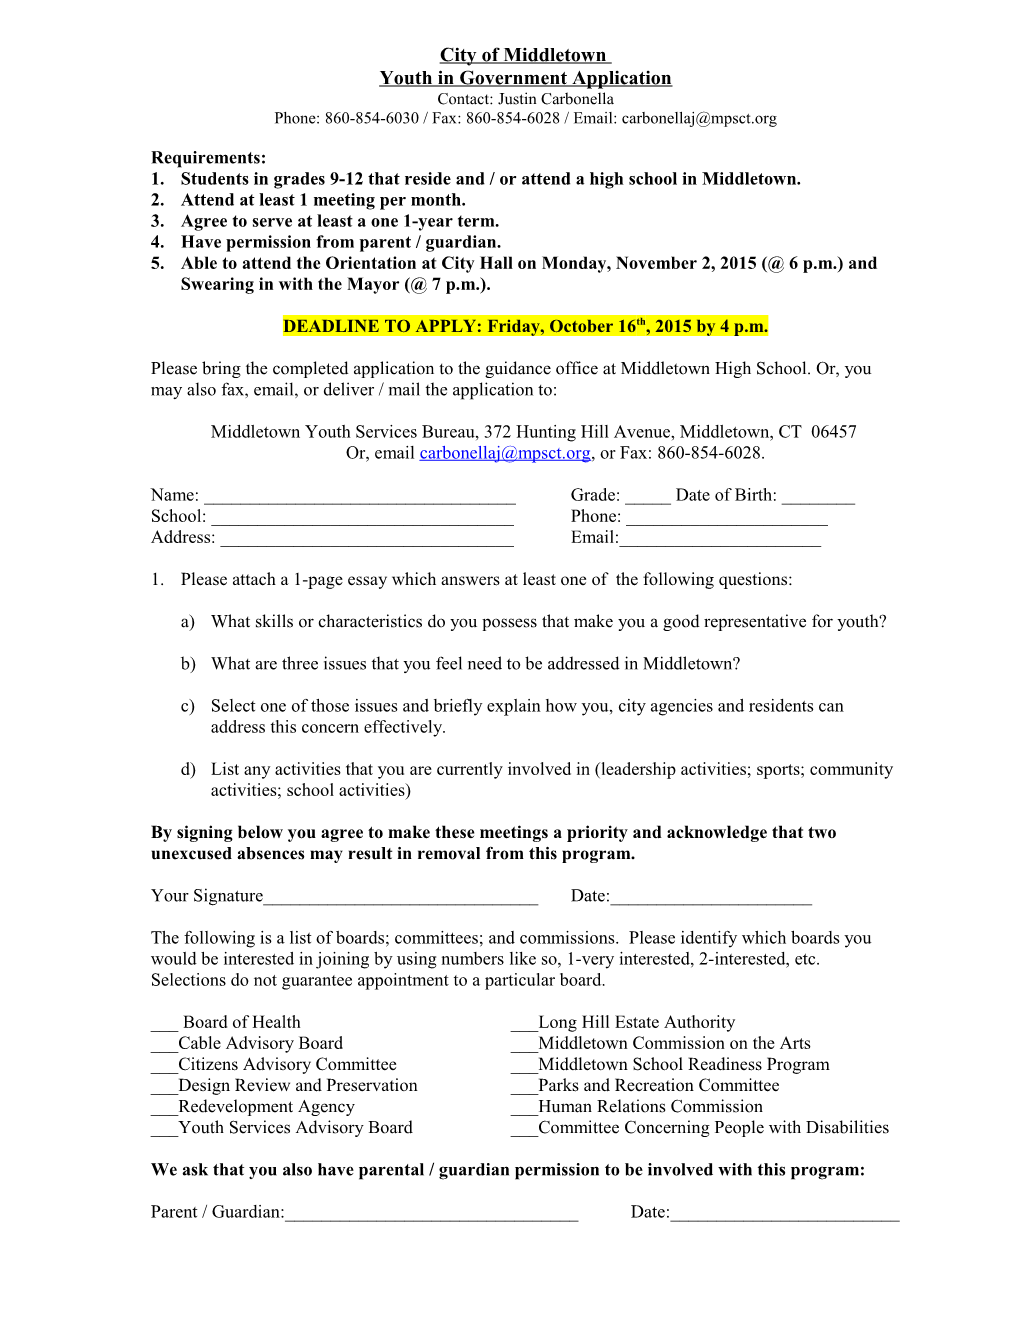 Middletown Youth in Government Application